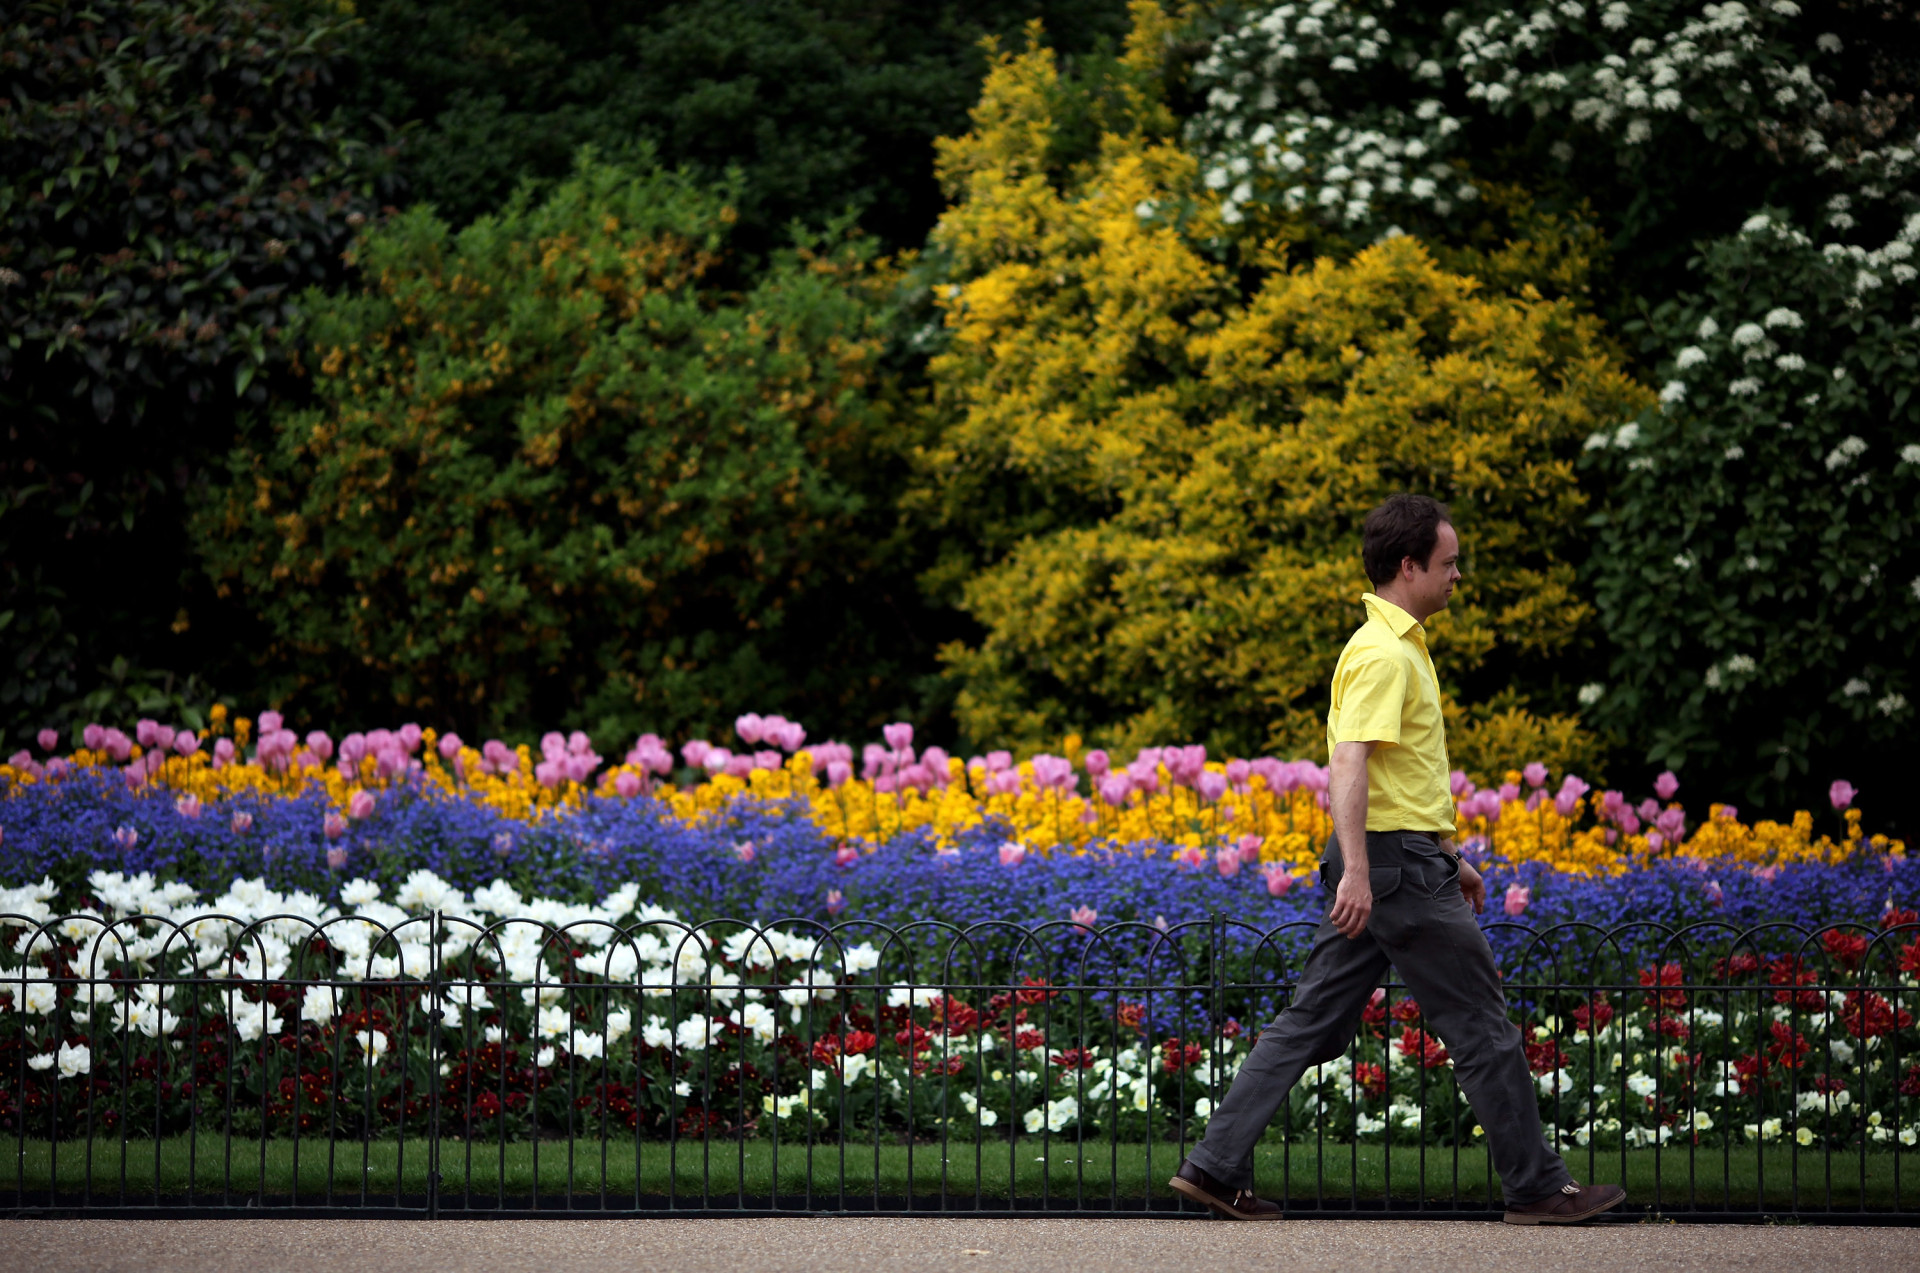 A colourful bed of flowers next to a path in St James' Park, London.